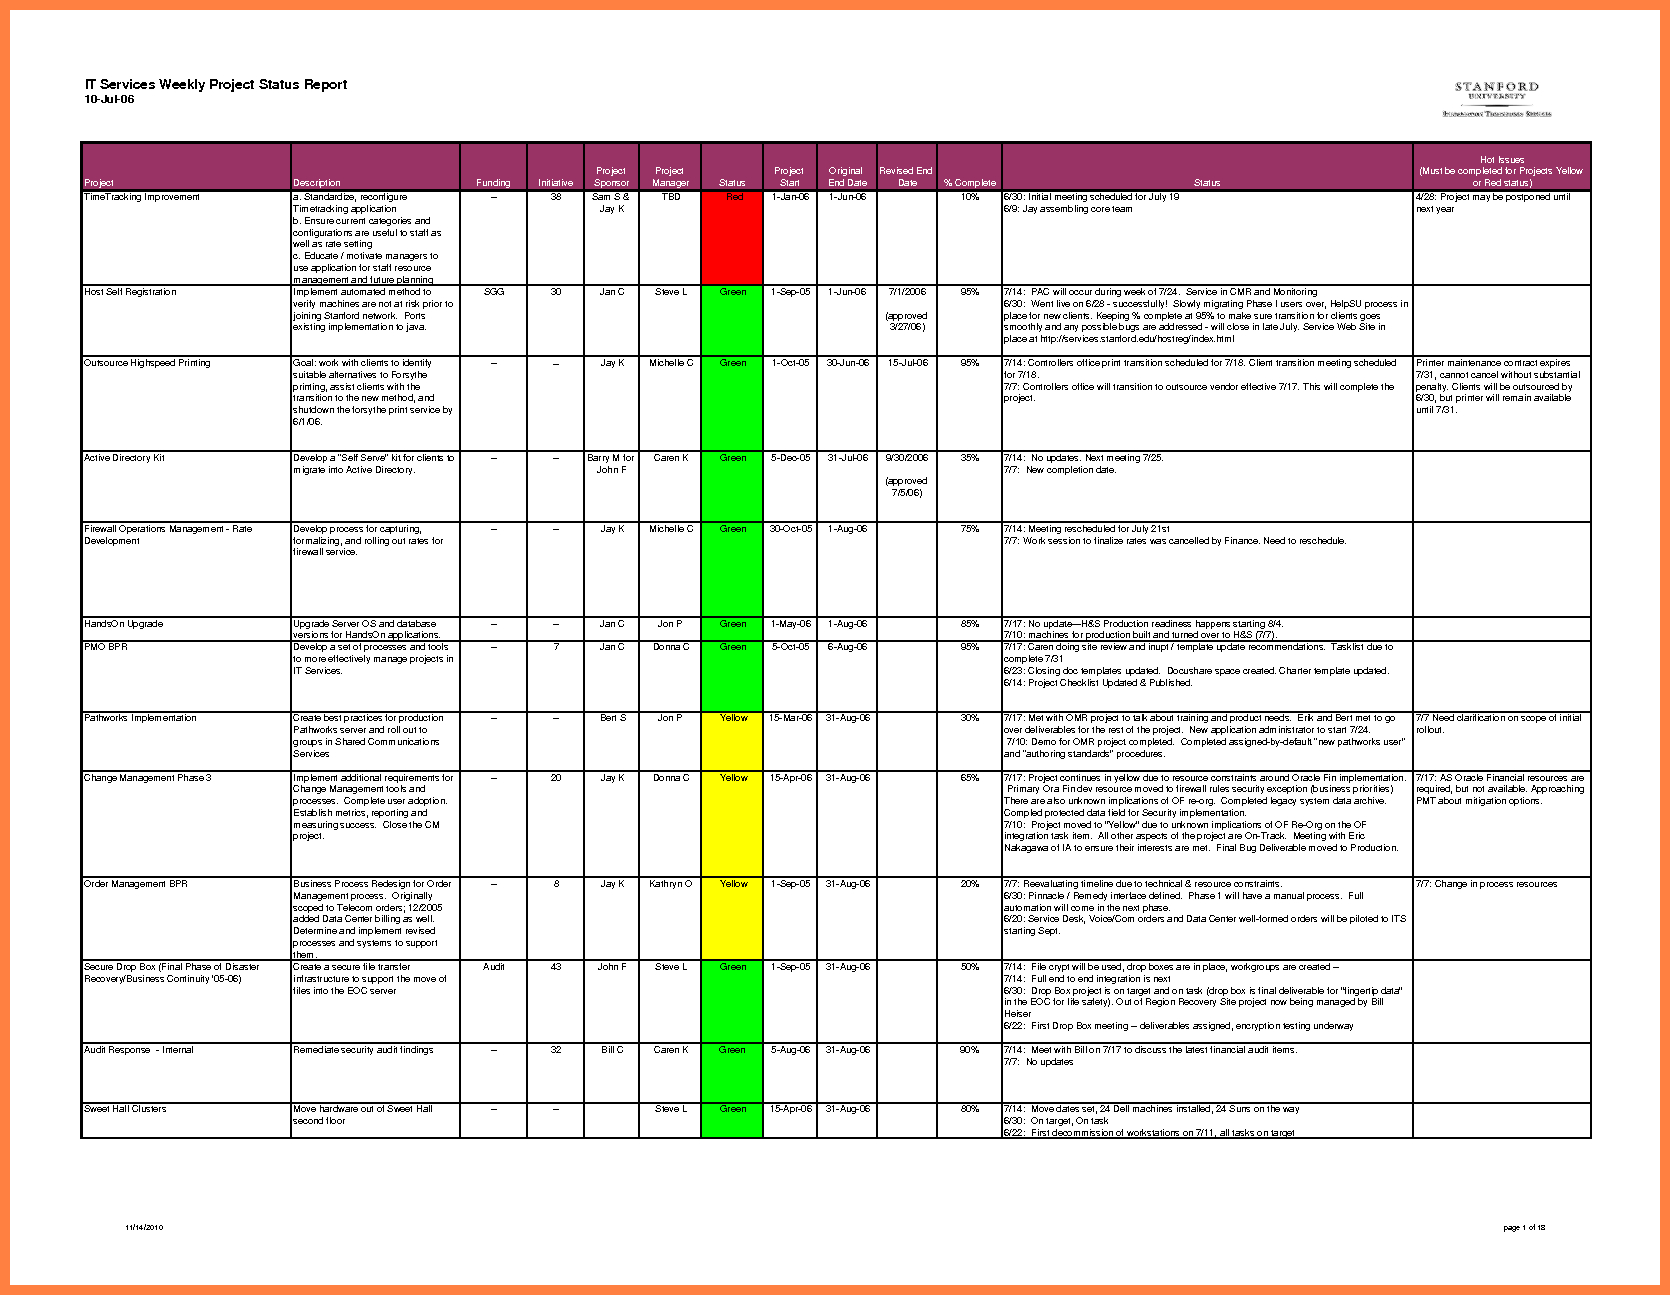 023 Excel Project Status Report Weekly Template 4Vy49Mzf Inside Weekly Status Report Template Excel